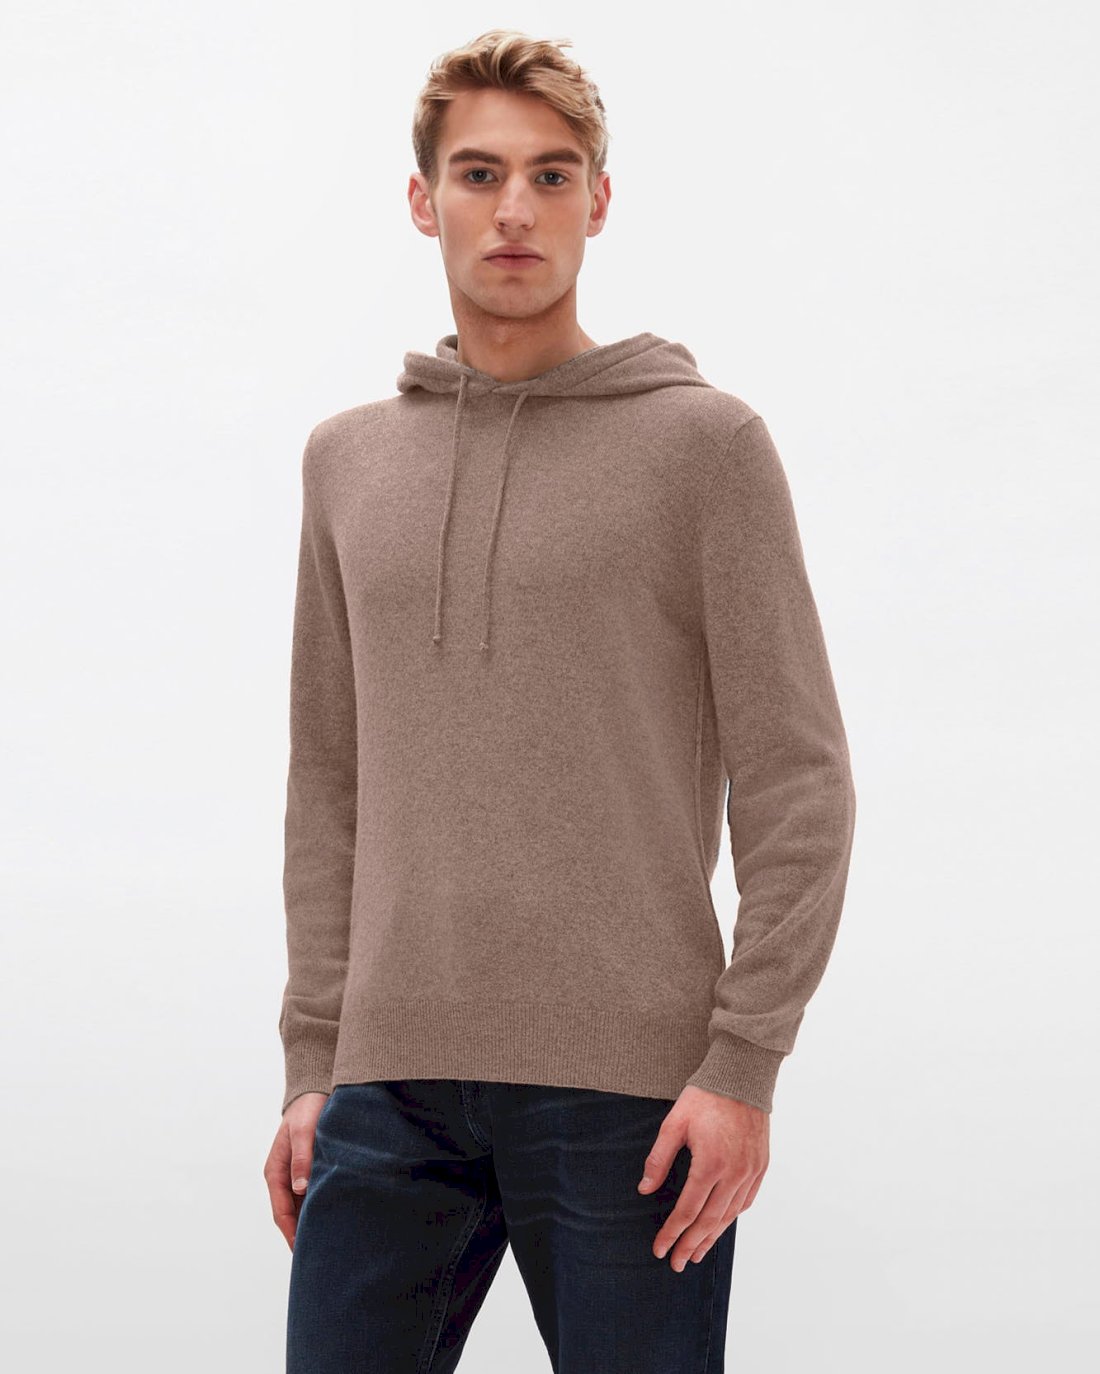 Cashmere Hoodie in Taupe | 7 For All Mankind